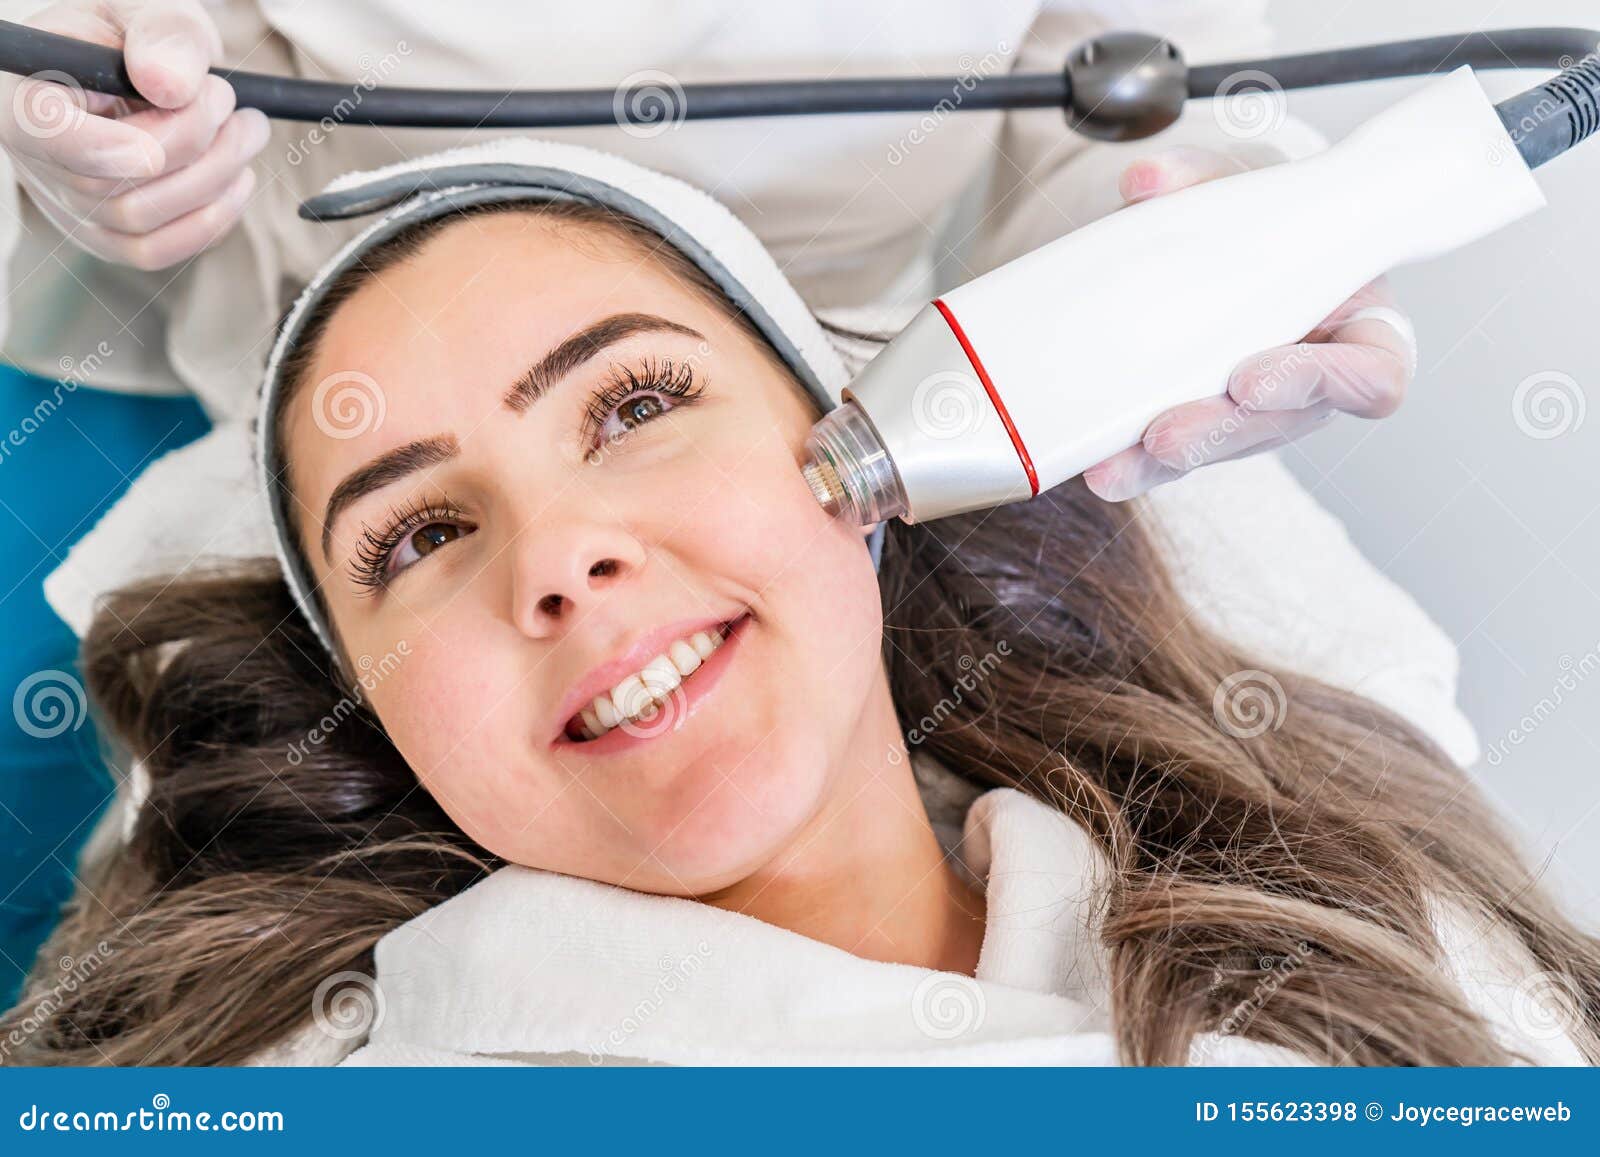 radio frequency microneedling machine handpiece on the cheek of a woman`s face during a beauty skin tightening treatment